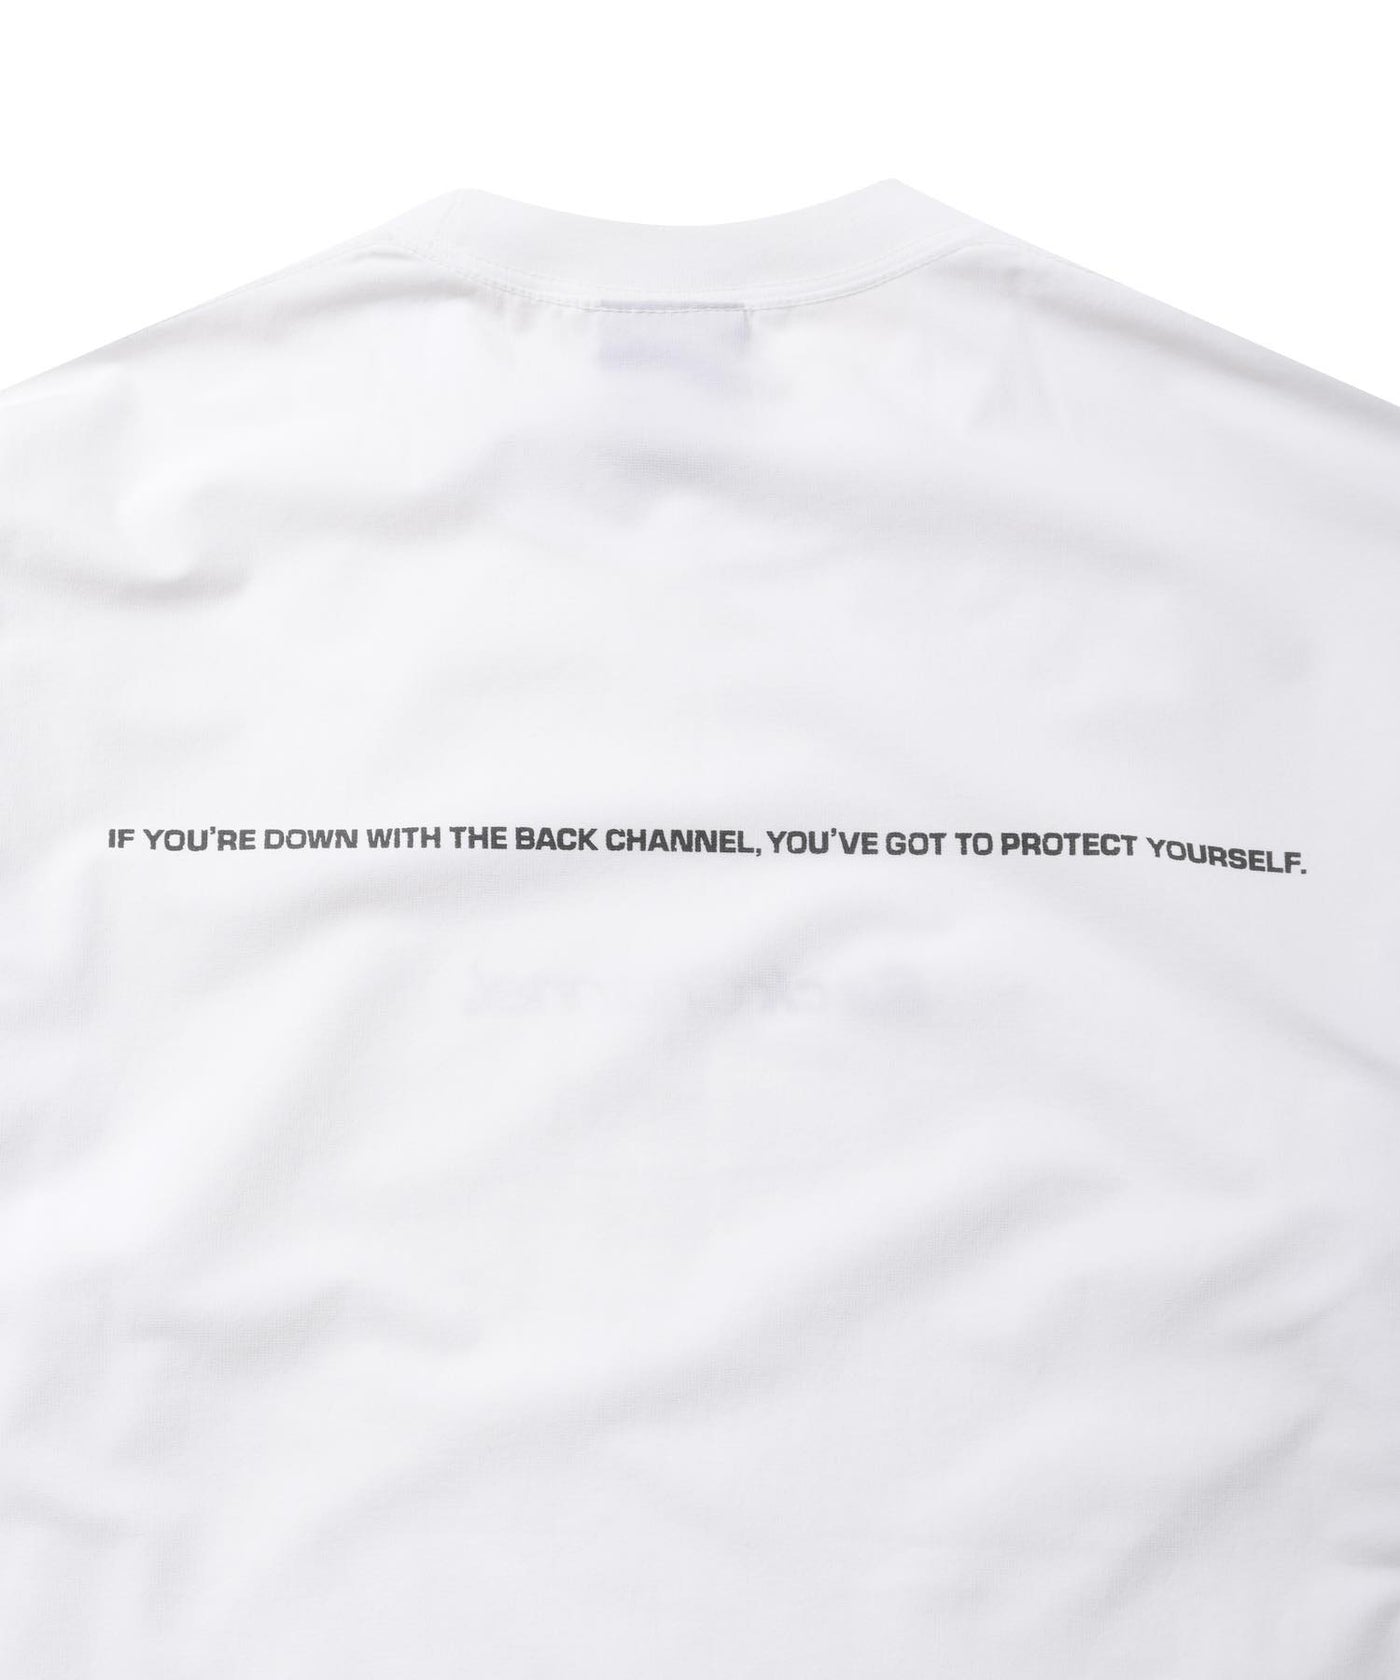 OFFICIAL LOGO STRETCH L/S TEE